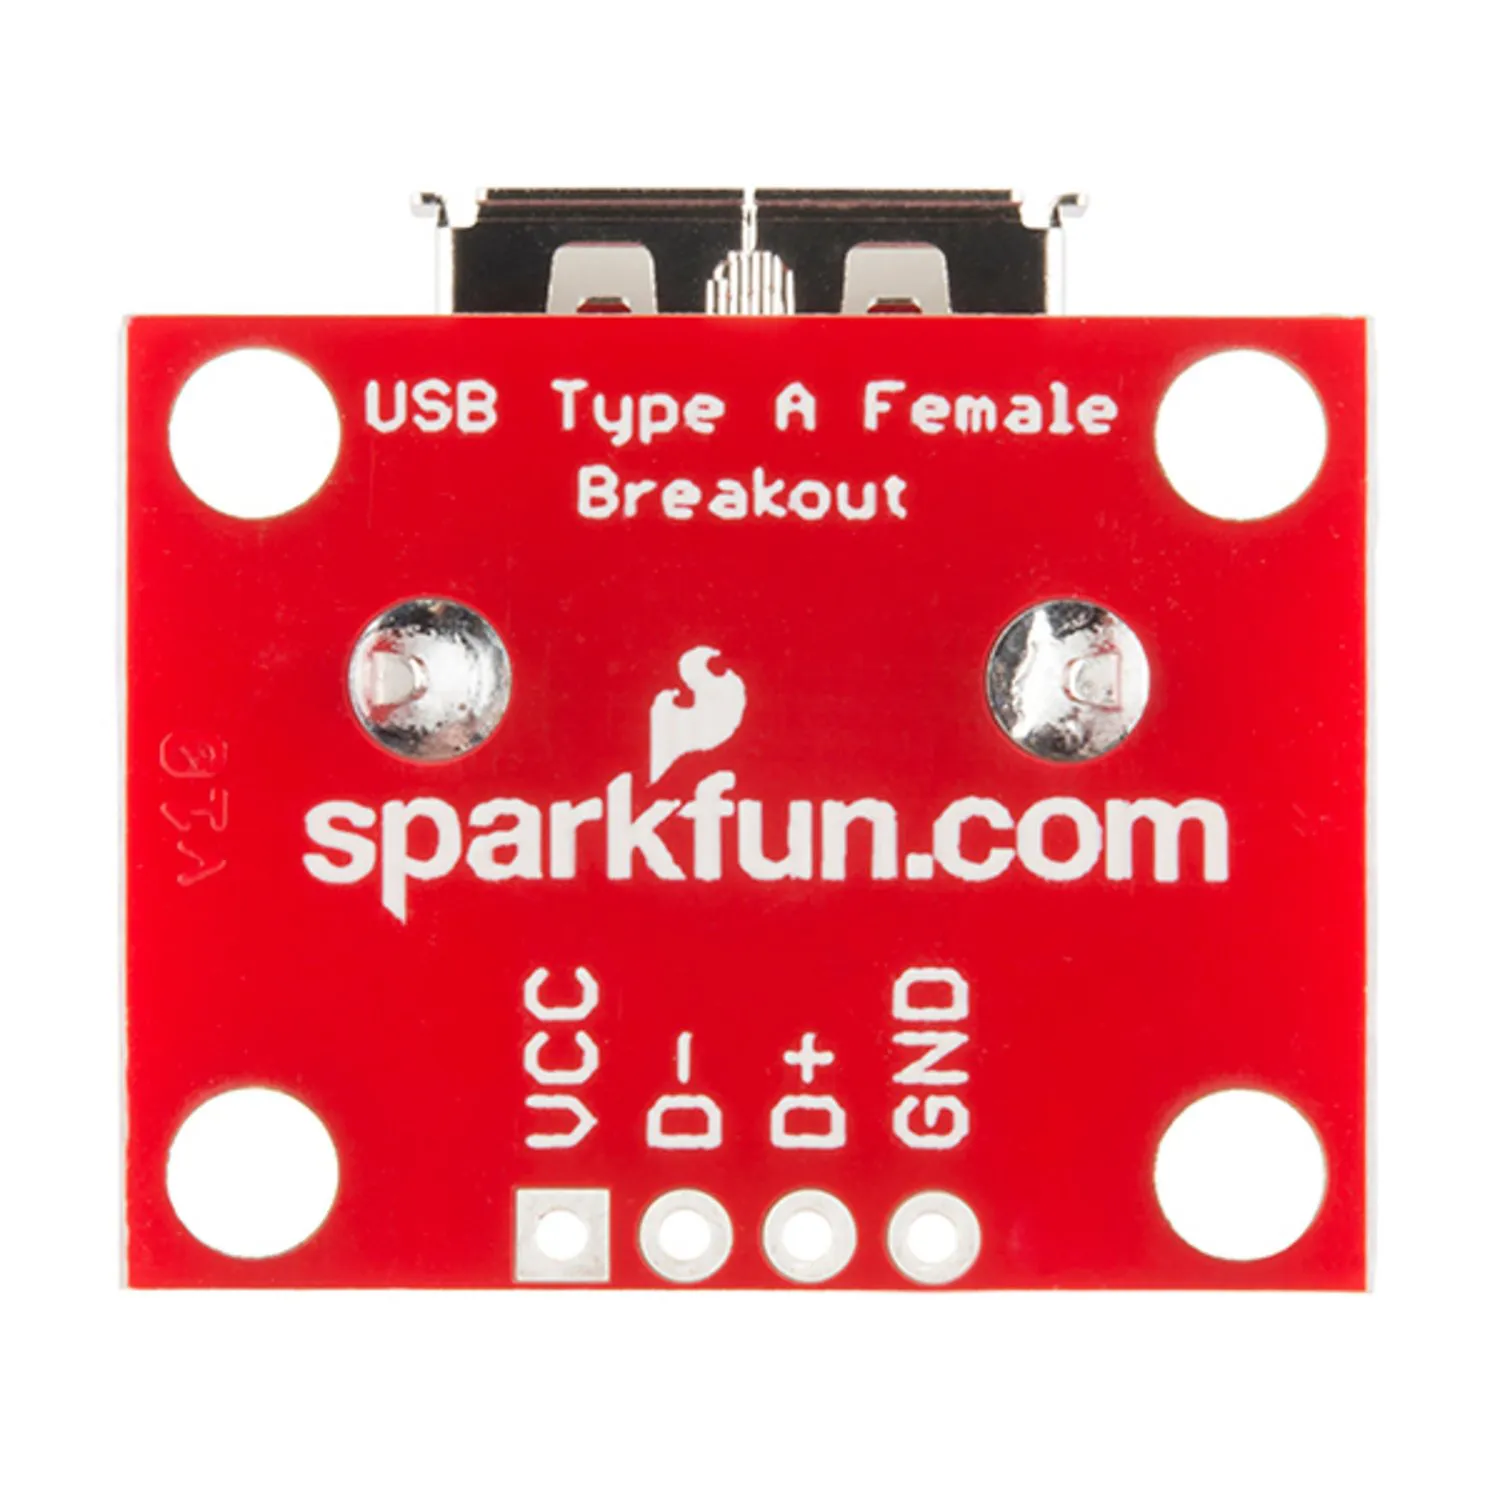 Photo of SparkFun USB Type A Female Breakout